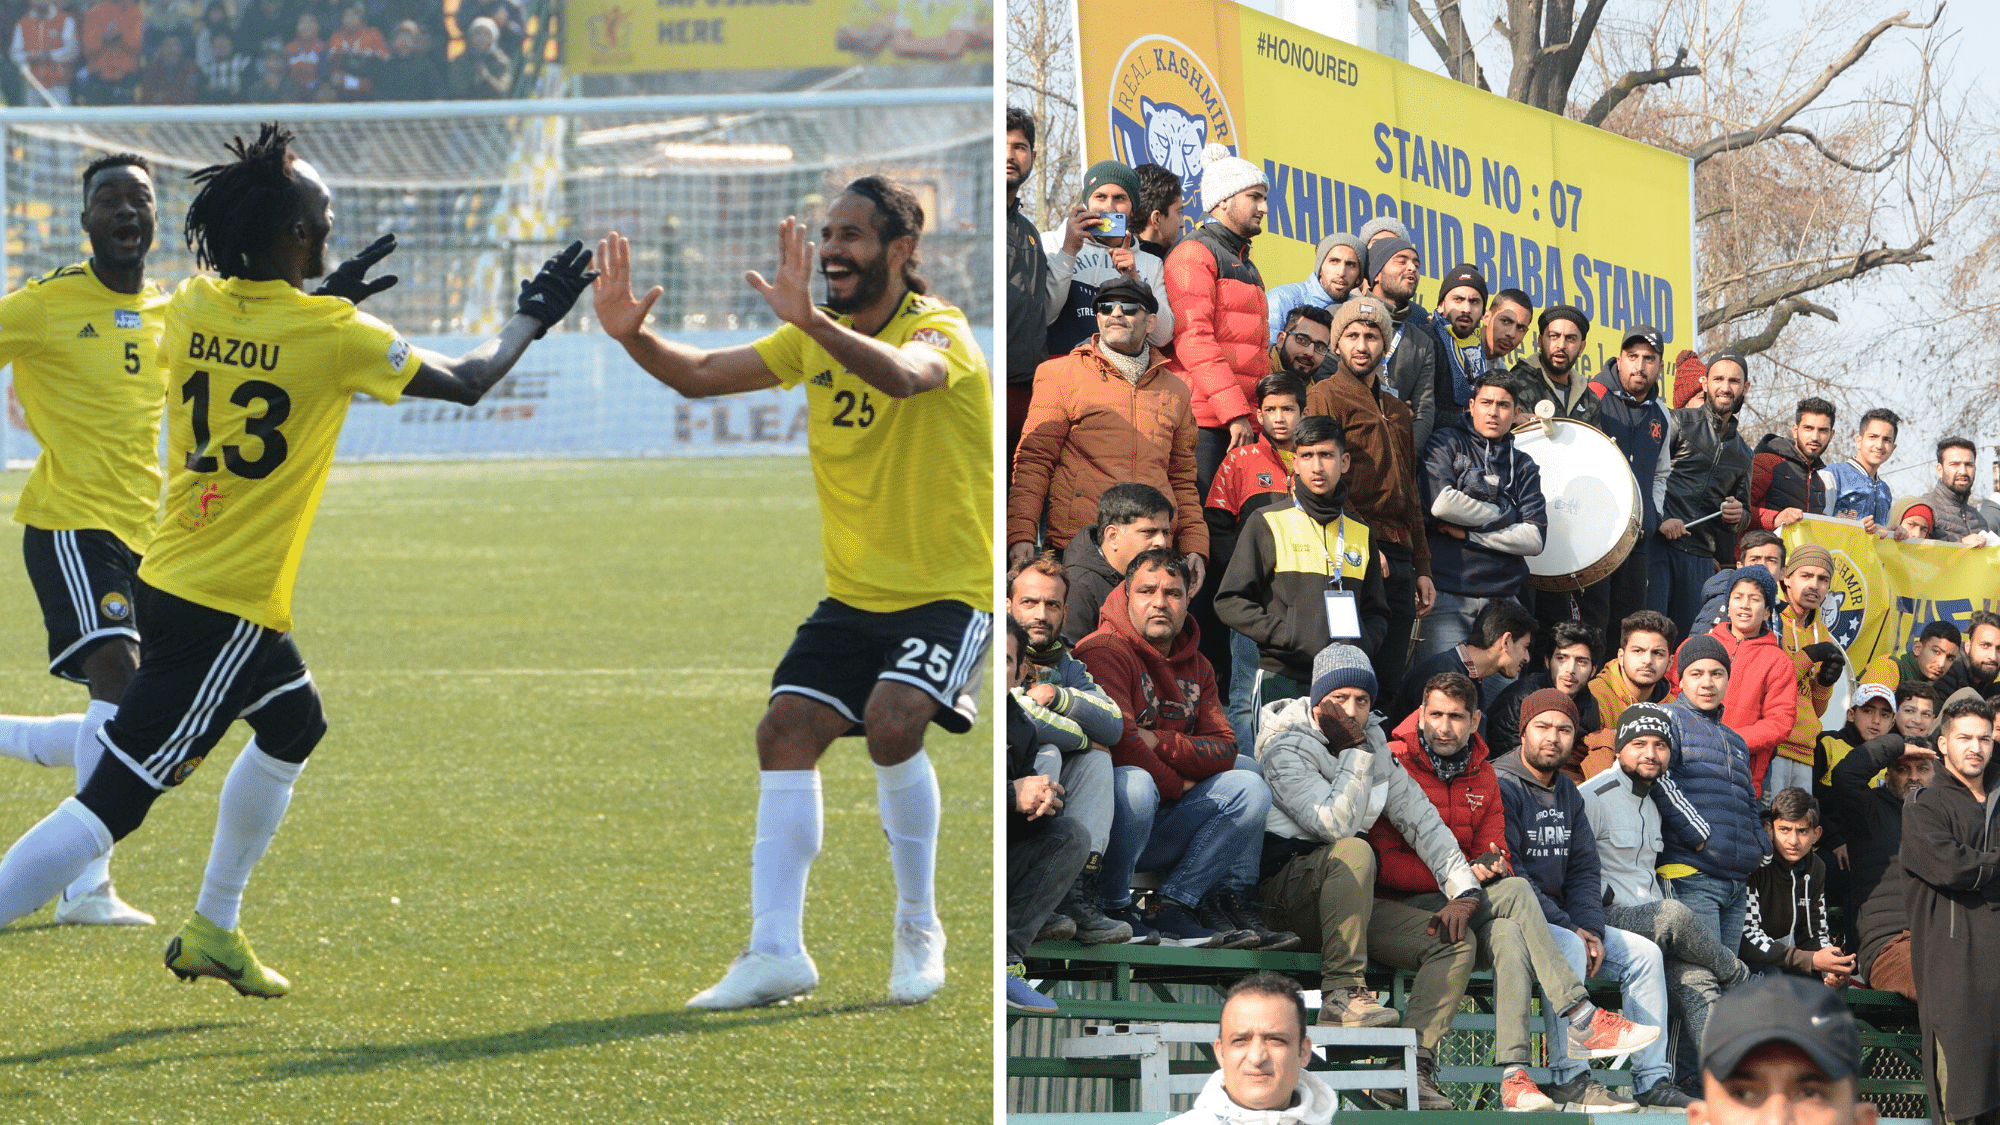 For Real Kashmir Danish Farooq and Bazie Armand struck the winners as fans witnessed the first football match in Srinagar this season.